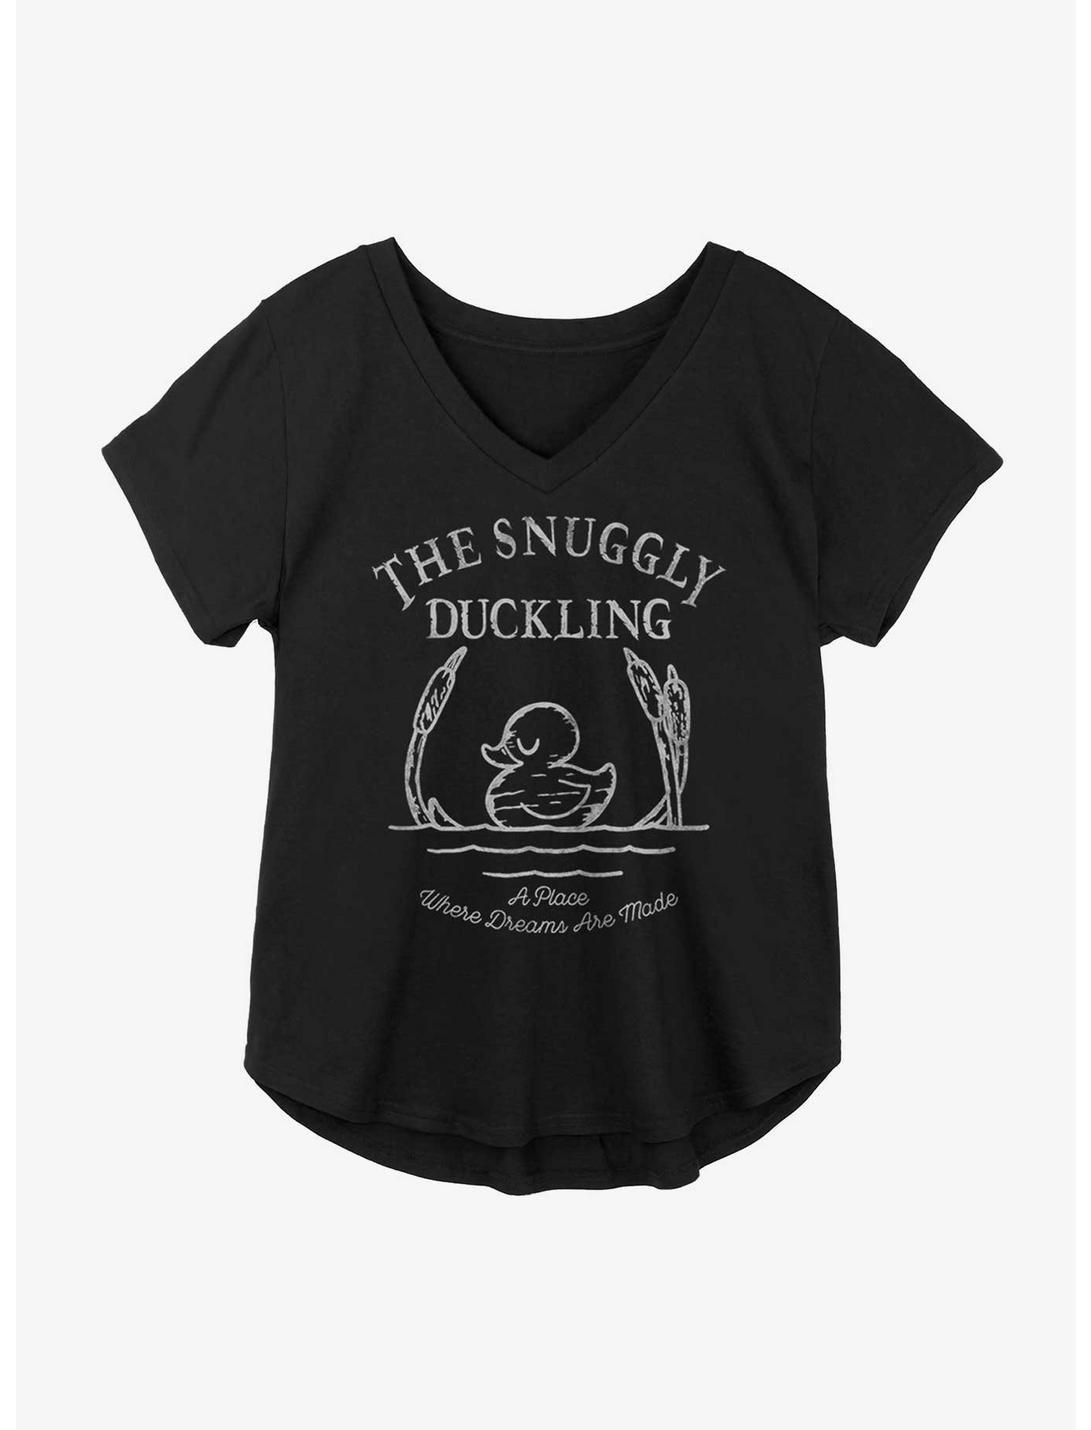 Disney Tangled The Snuggly Duckling Girls Plus Size T-Shirt, BLACK, hi-res